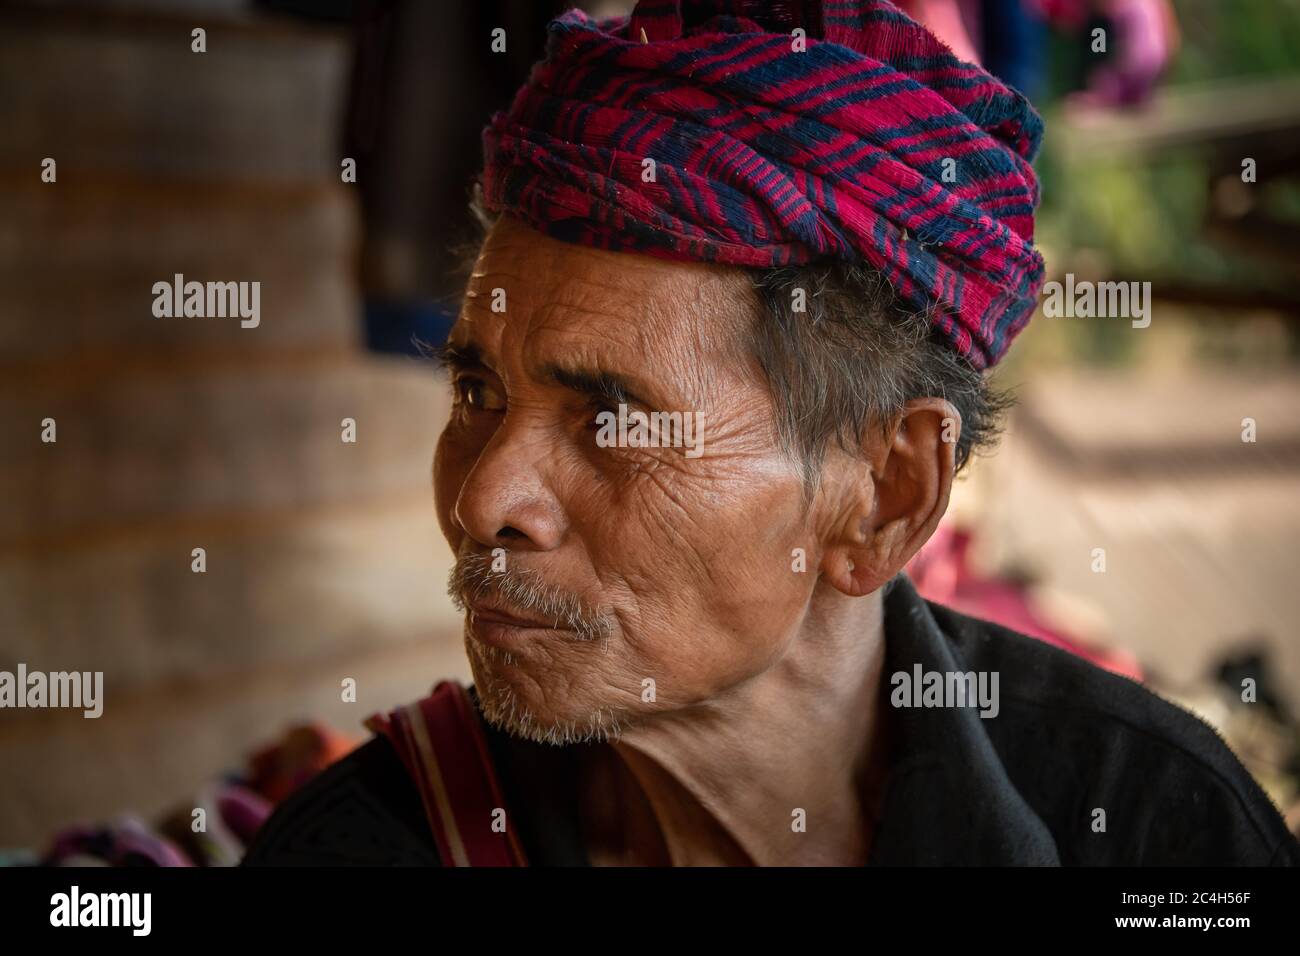 Loikaw, Myanmar - February 2020: Portrait of an old man from the Kayaw Tribe, a minority group living in the remote mountain village of Htay Kho. Stock Photo